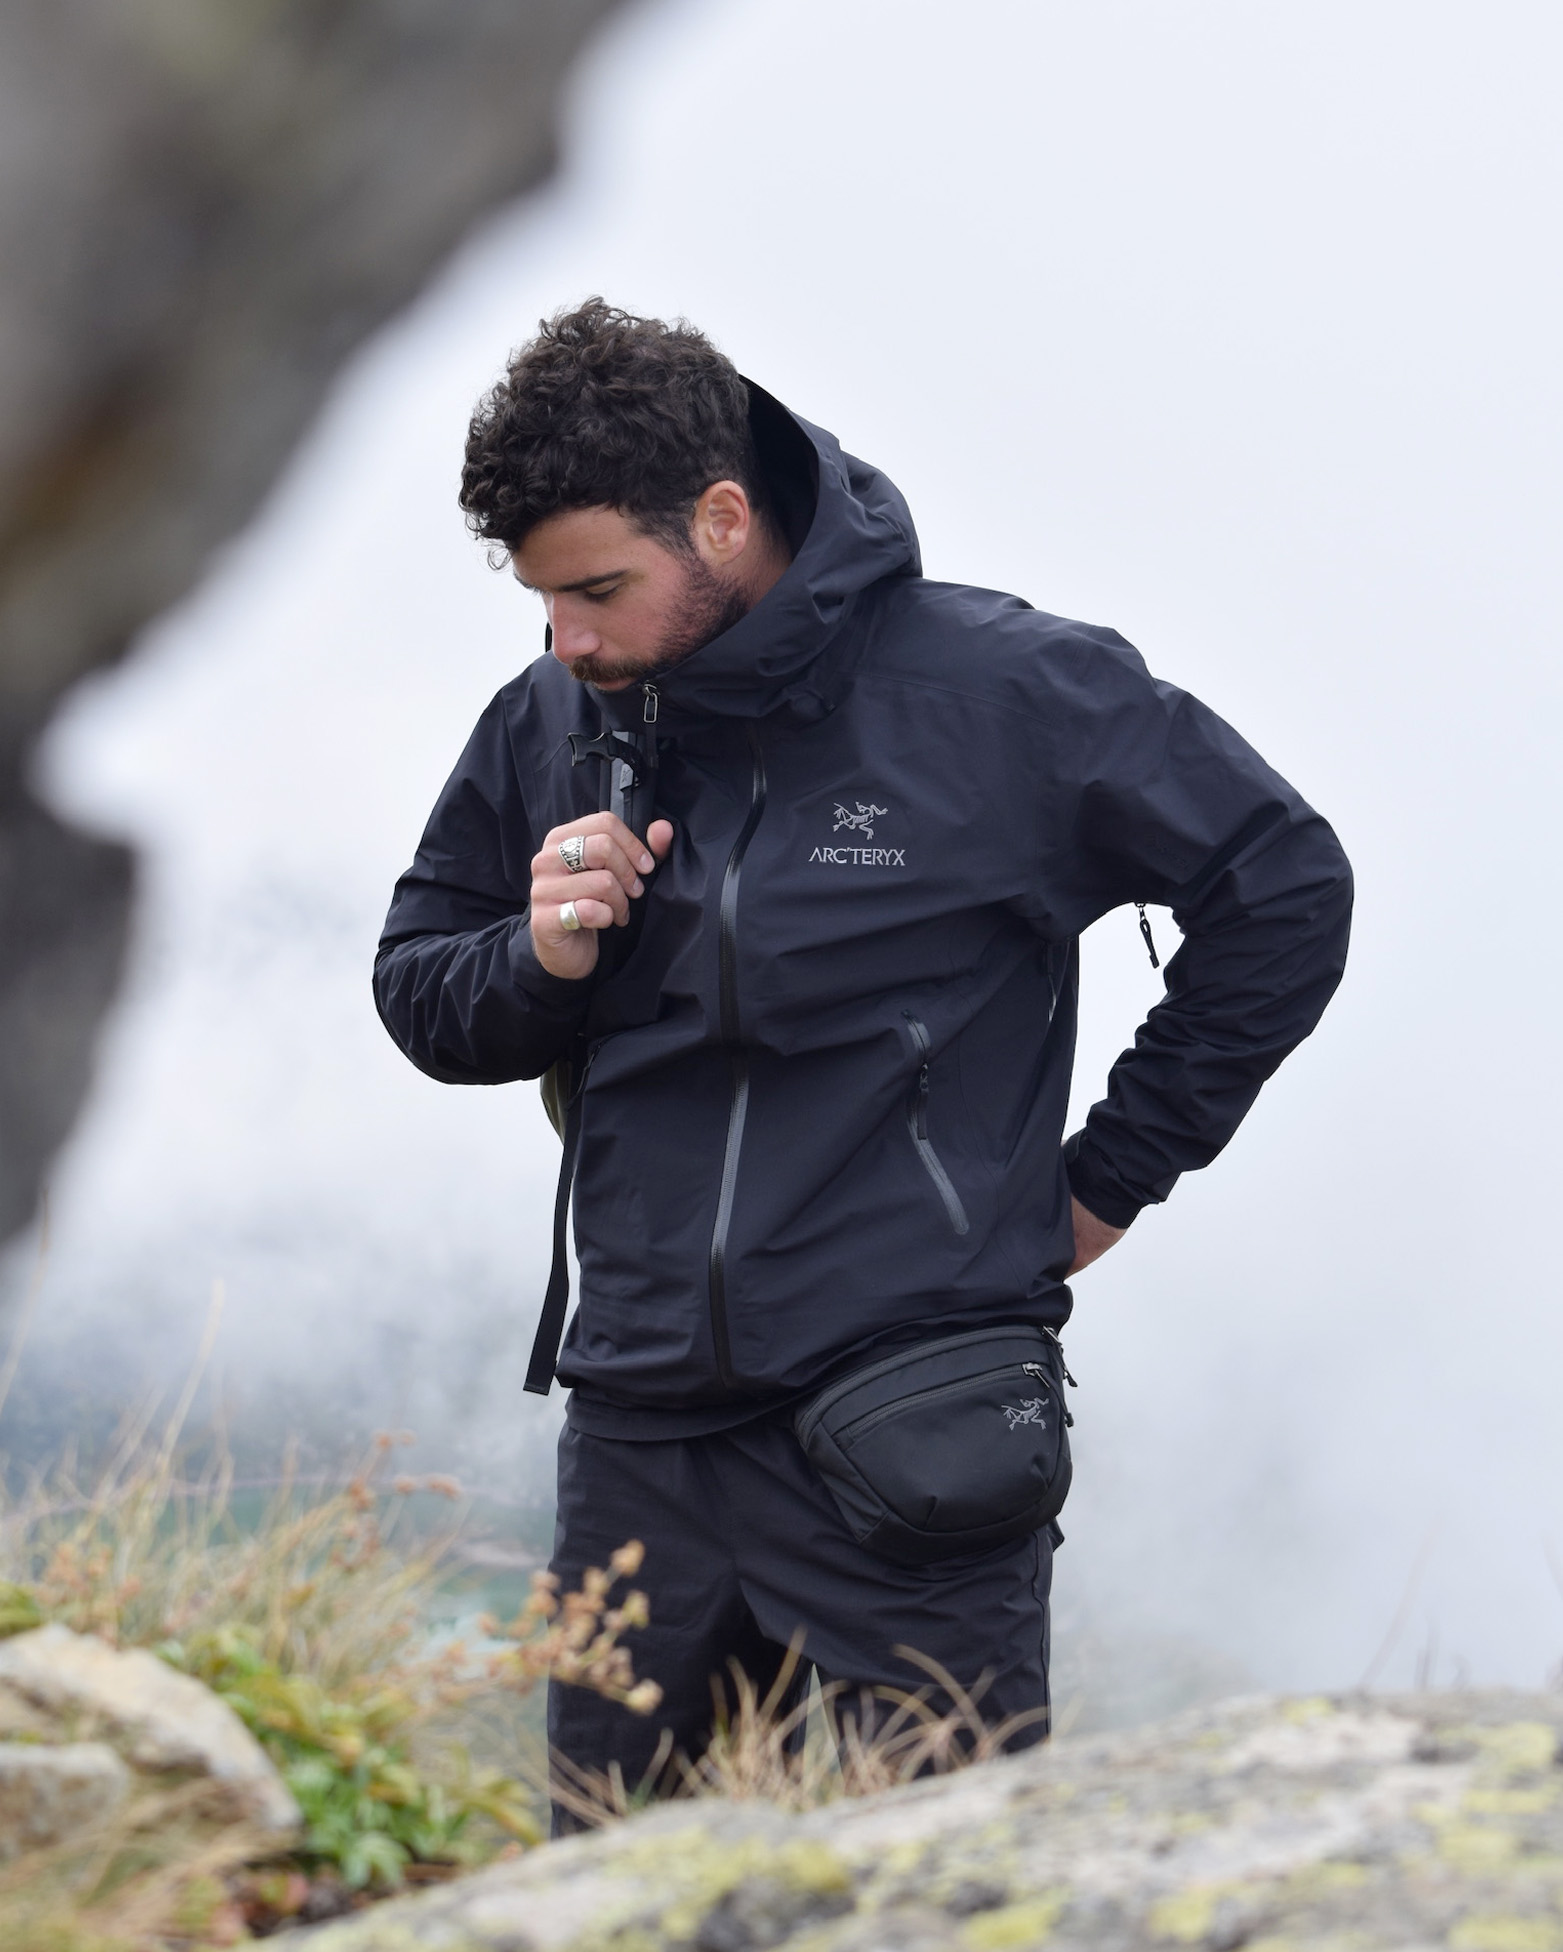 Our opinion on Arcteryx clothing and accessories